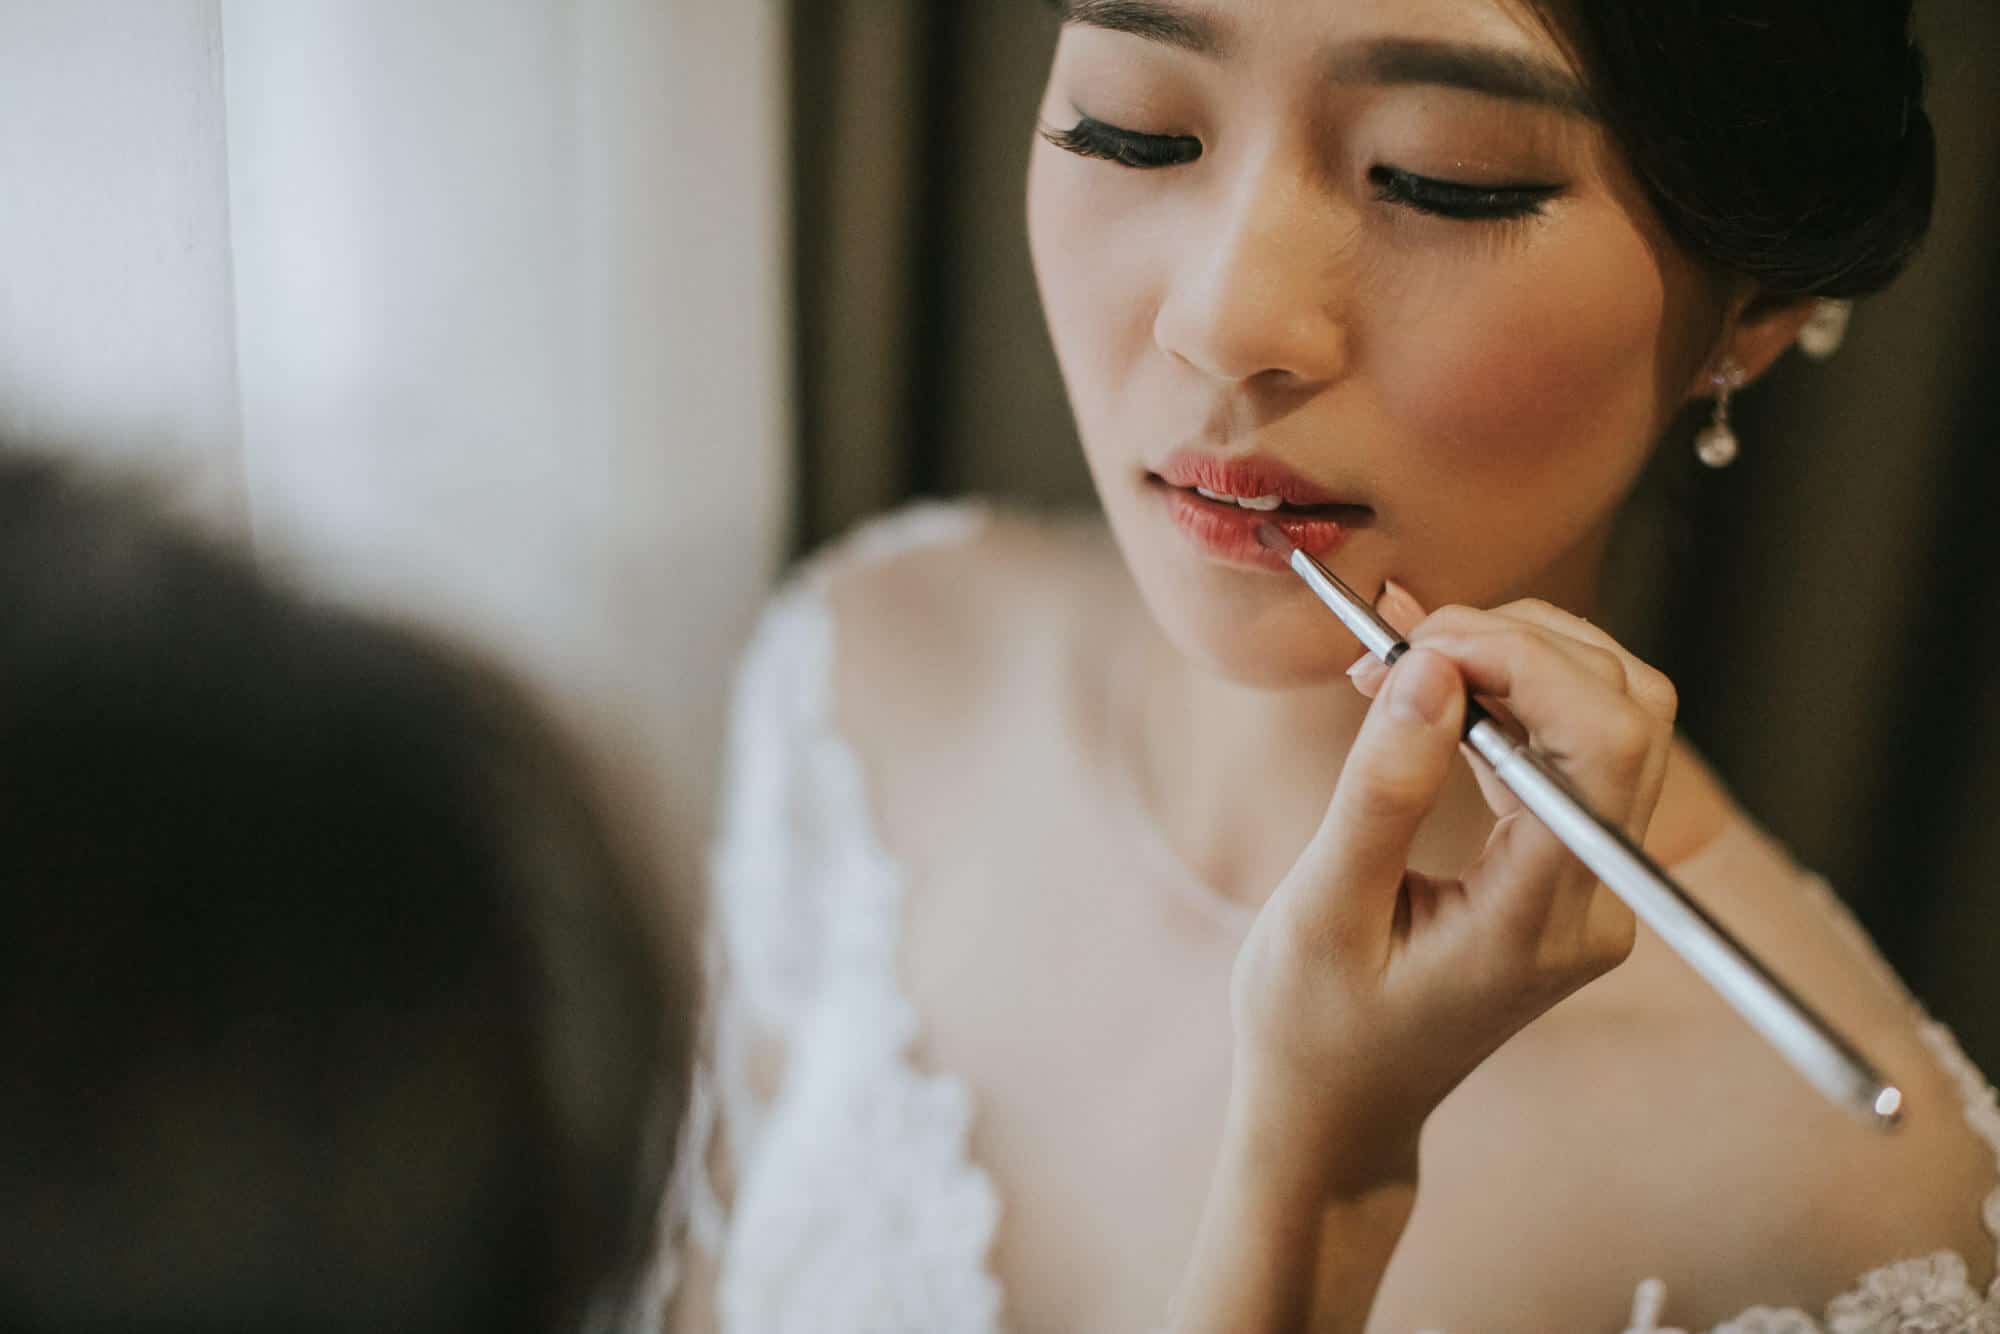 fairy tail beautiful wedding gown dress Malaysia Classic Simple elegant Wedding St. Andrew Church Kuala Lumpur Cliff Choong Photography bride bridesmaids groom getting ready makeup lips red white